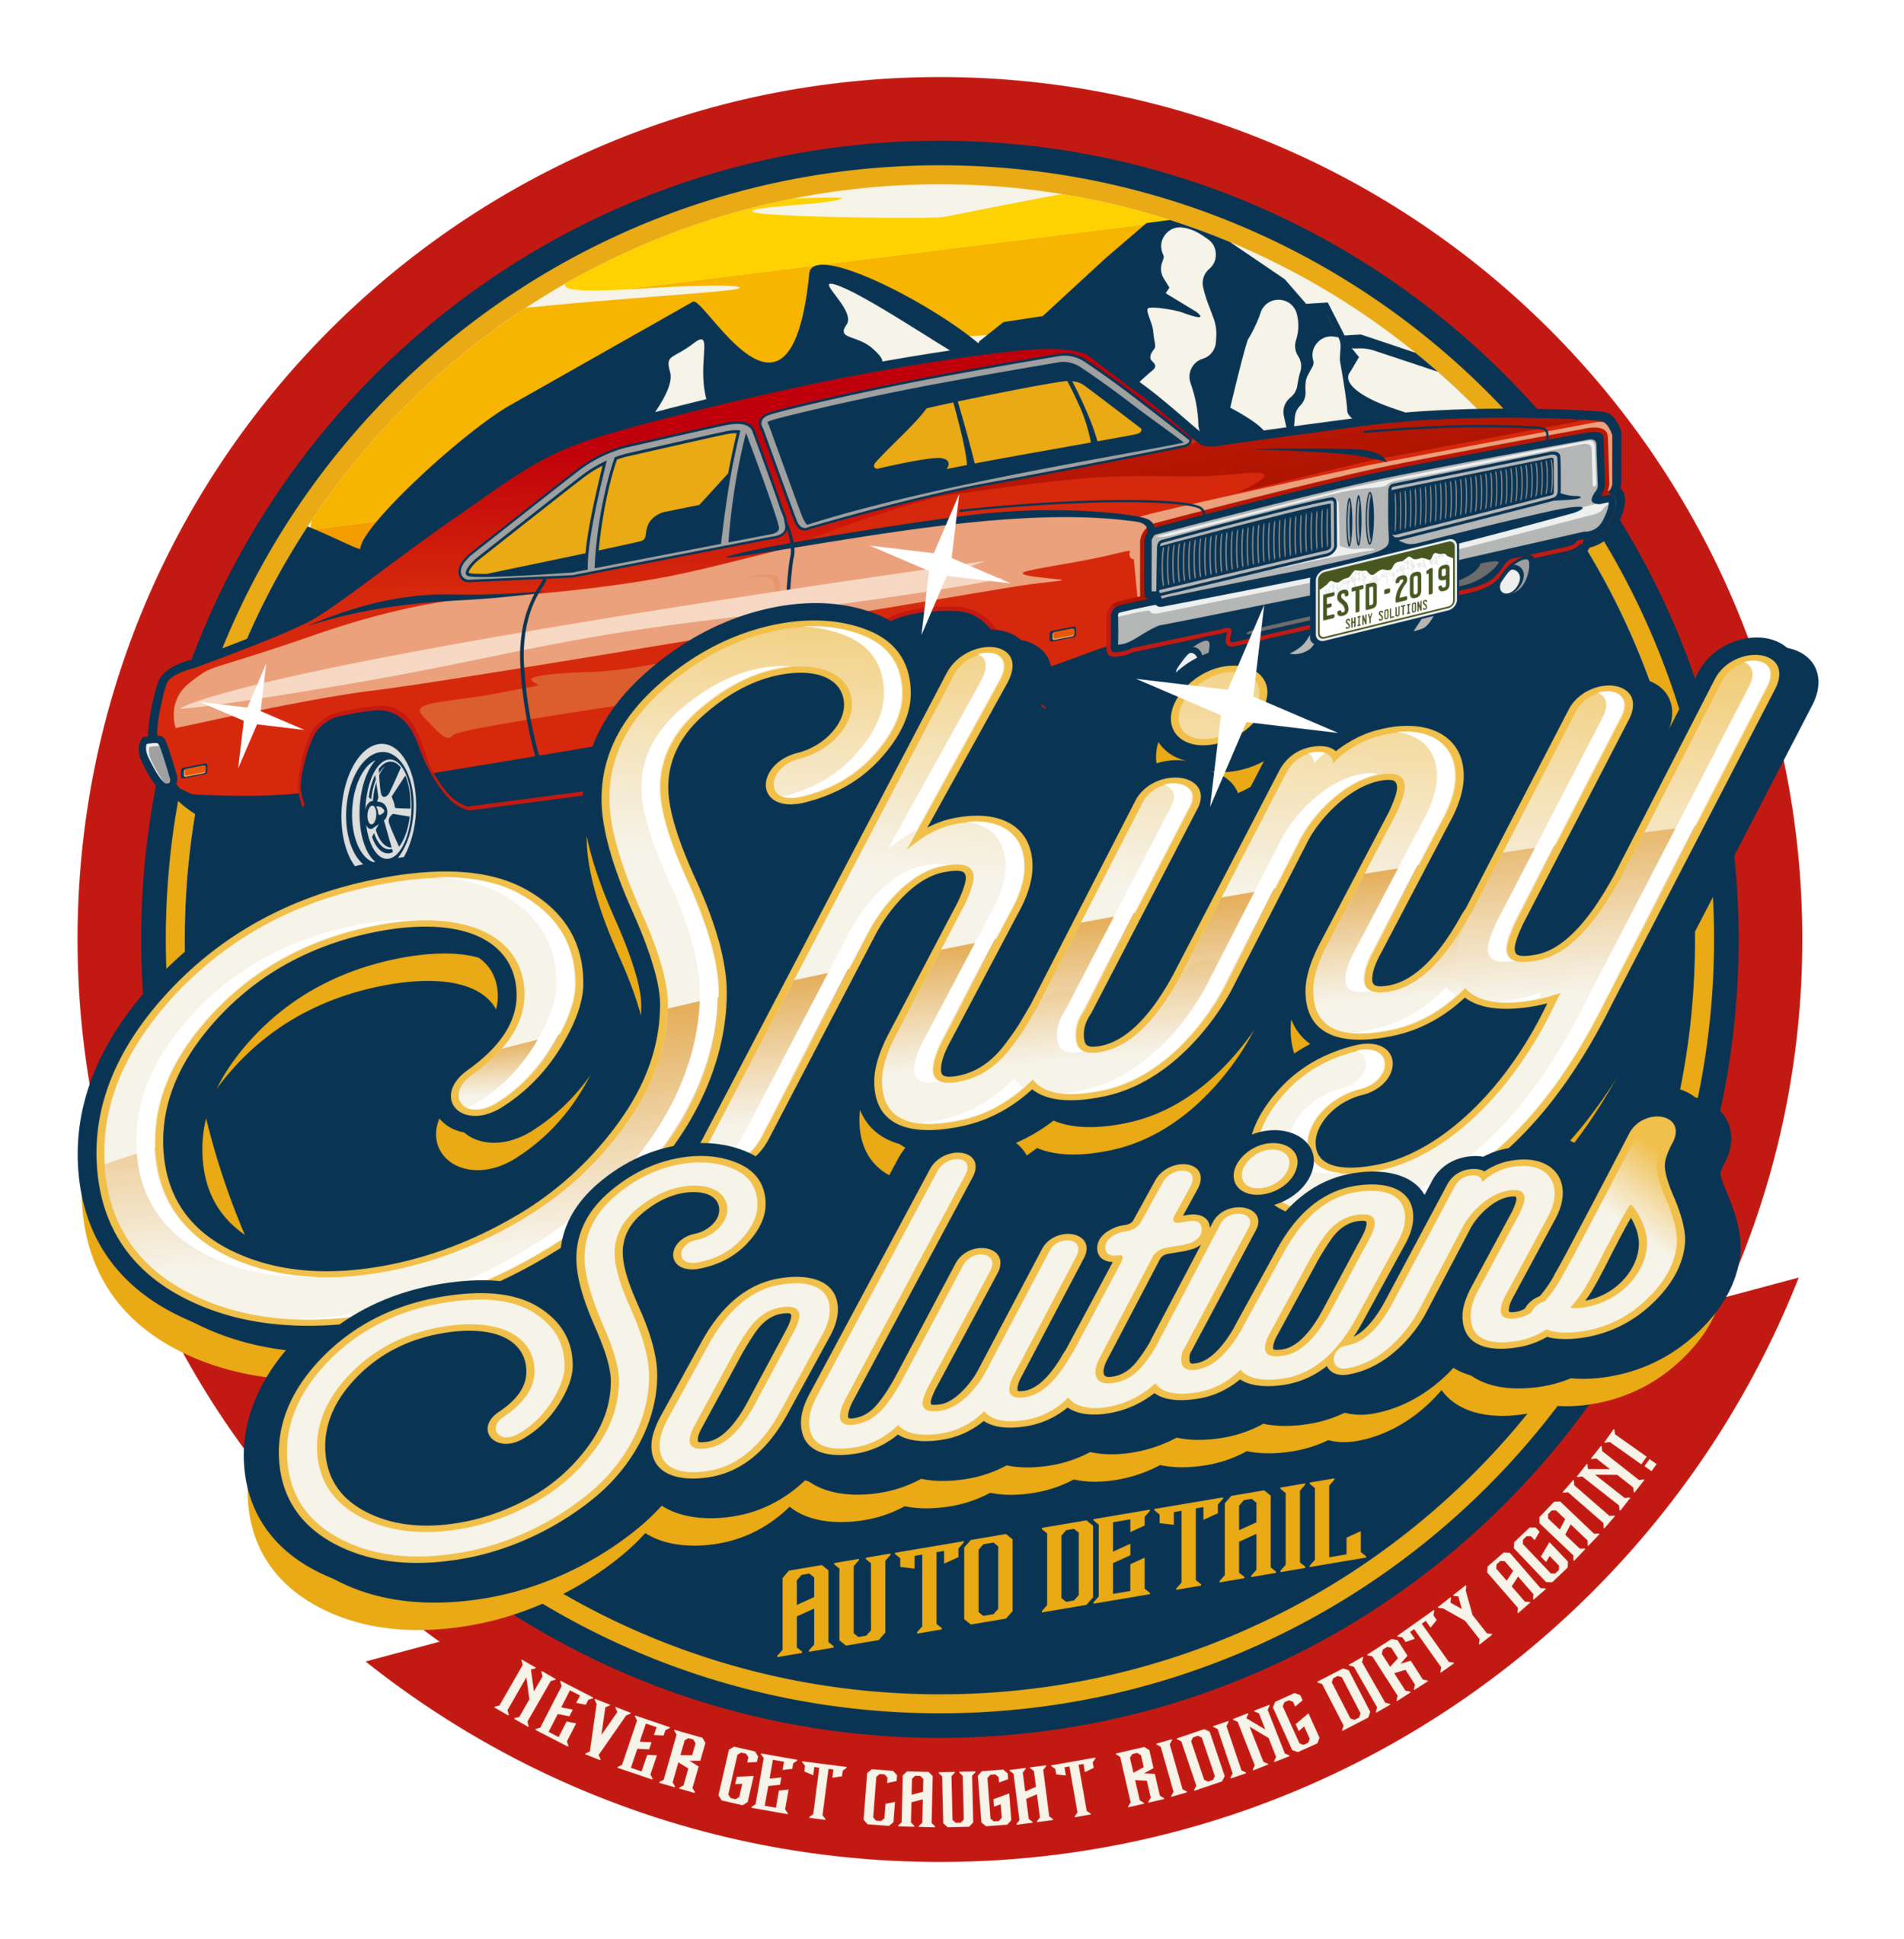 Shiny Solutions Auto Detail